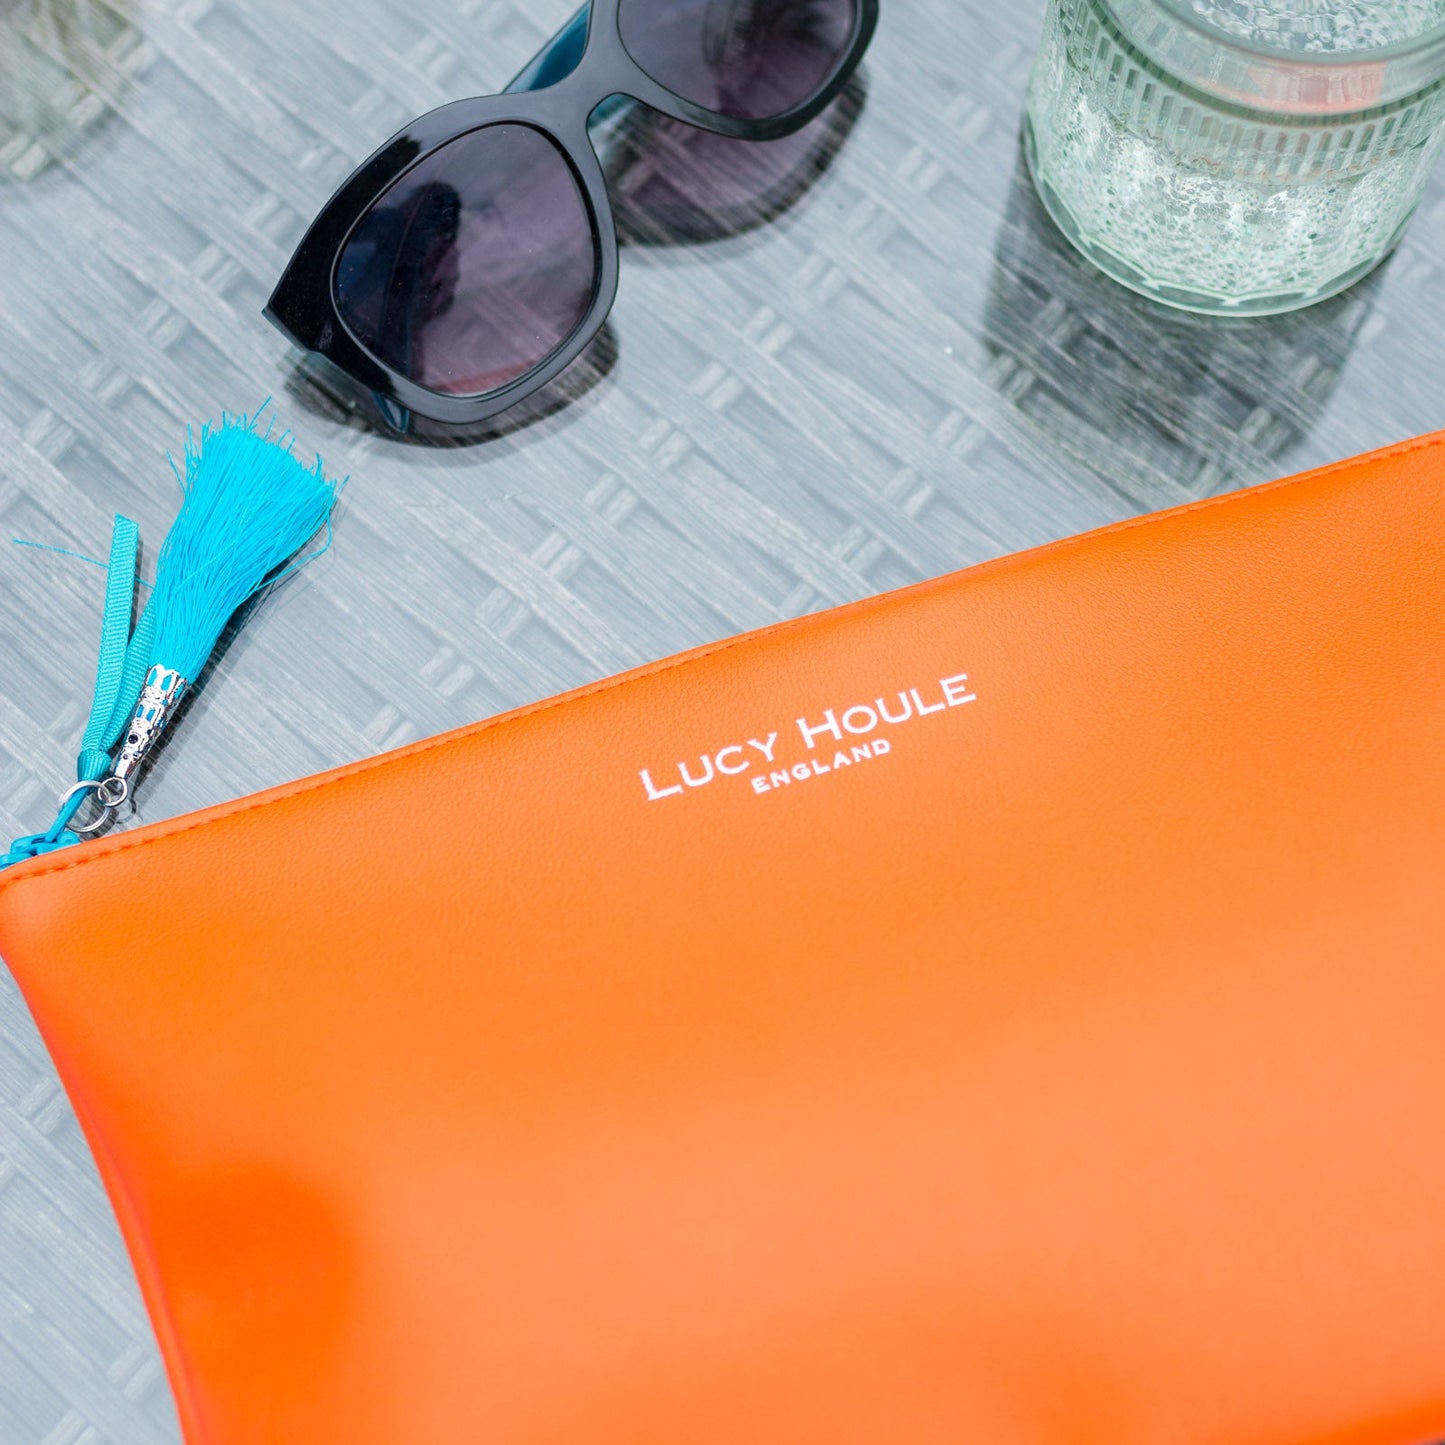 Faux Leather Orange Clutch with Turquoise Tassel